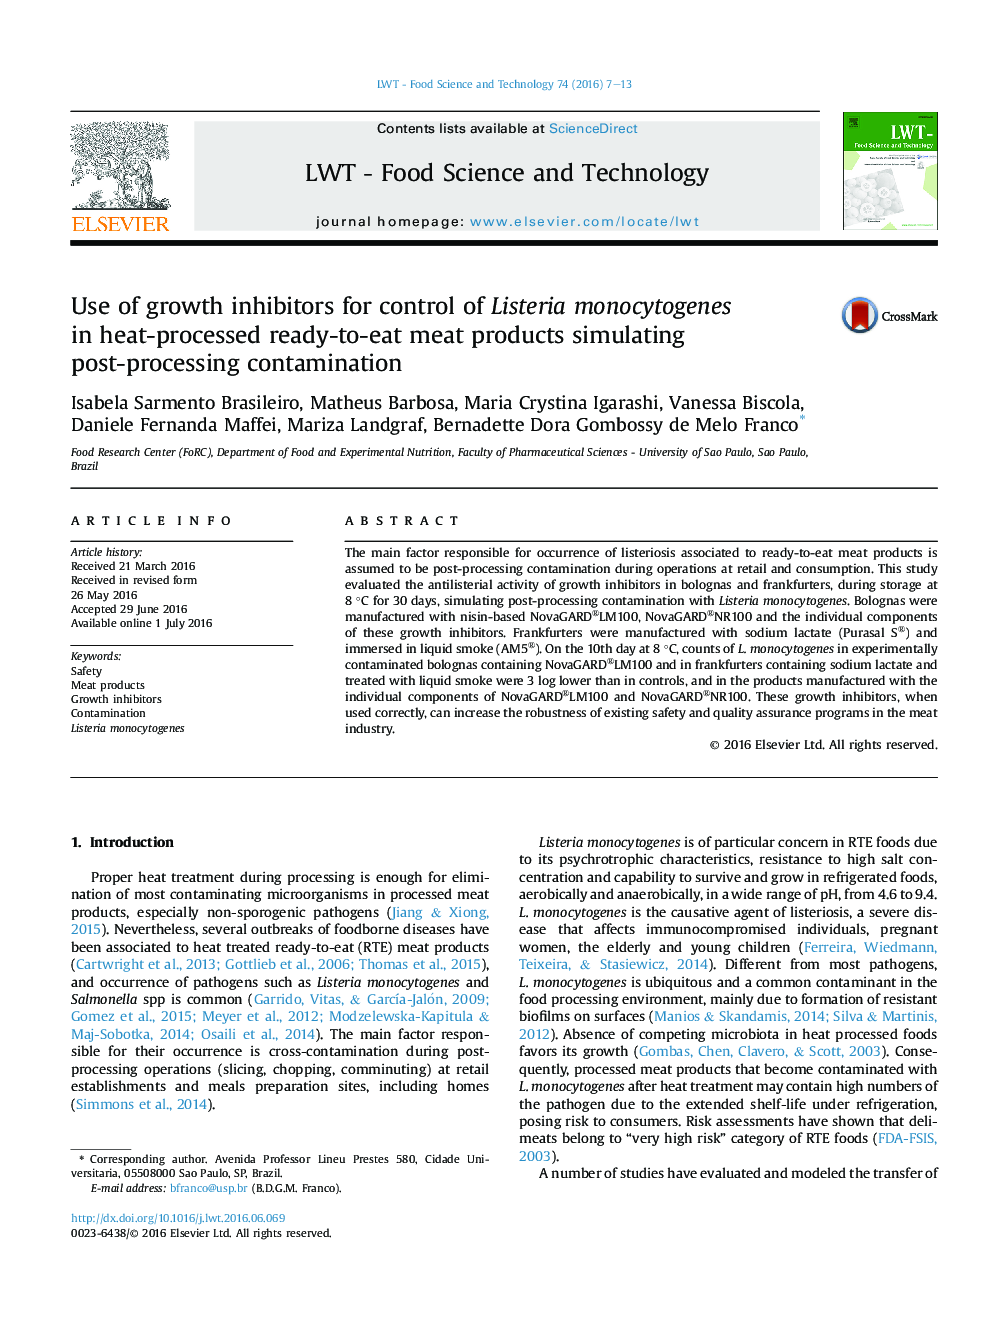 Use of growth inhibitors for control of Listeria monocytogenes in heat-processed ready-to-eat meat products simulating post-processing contamination